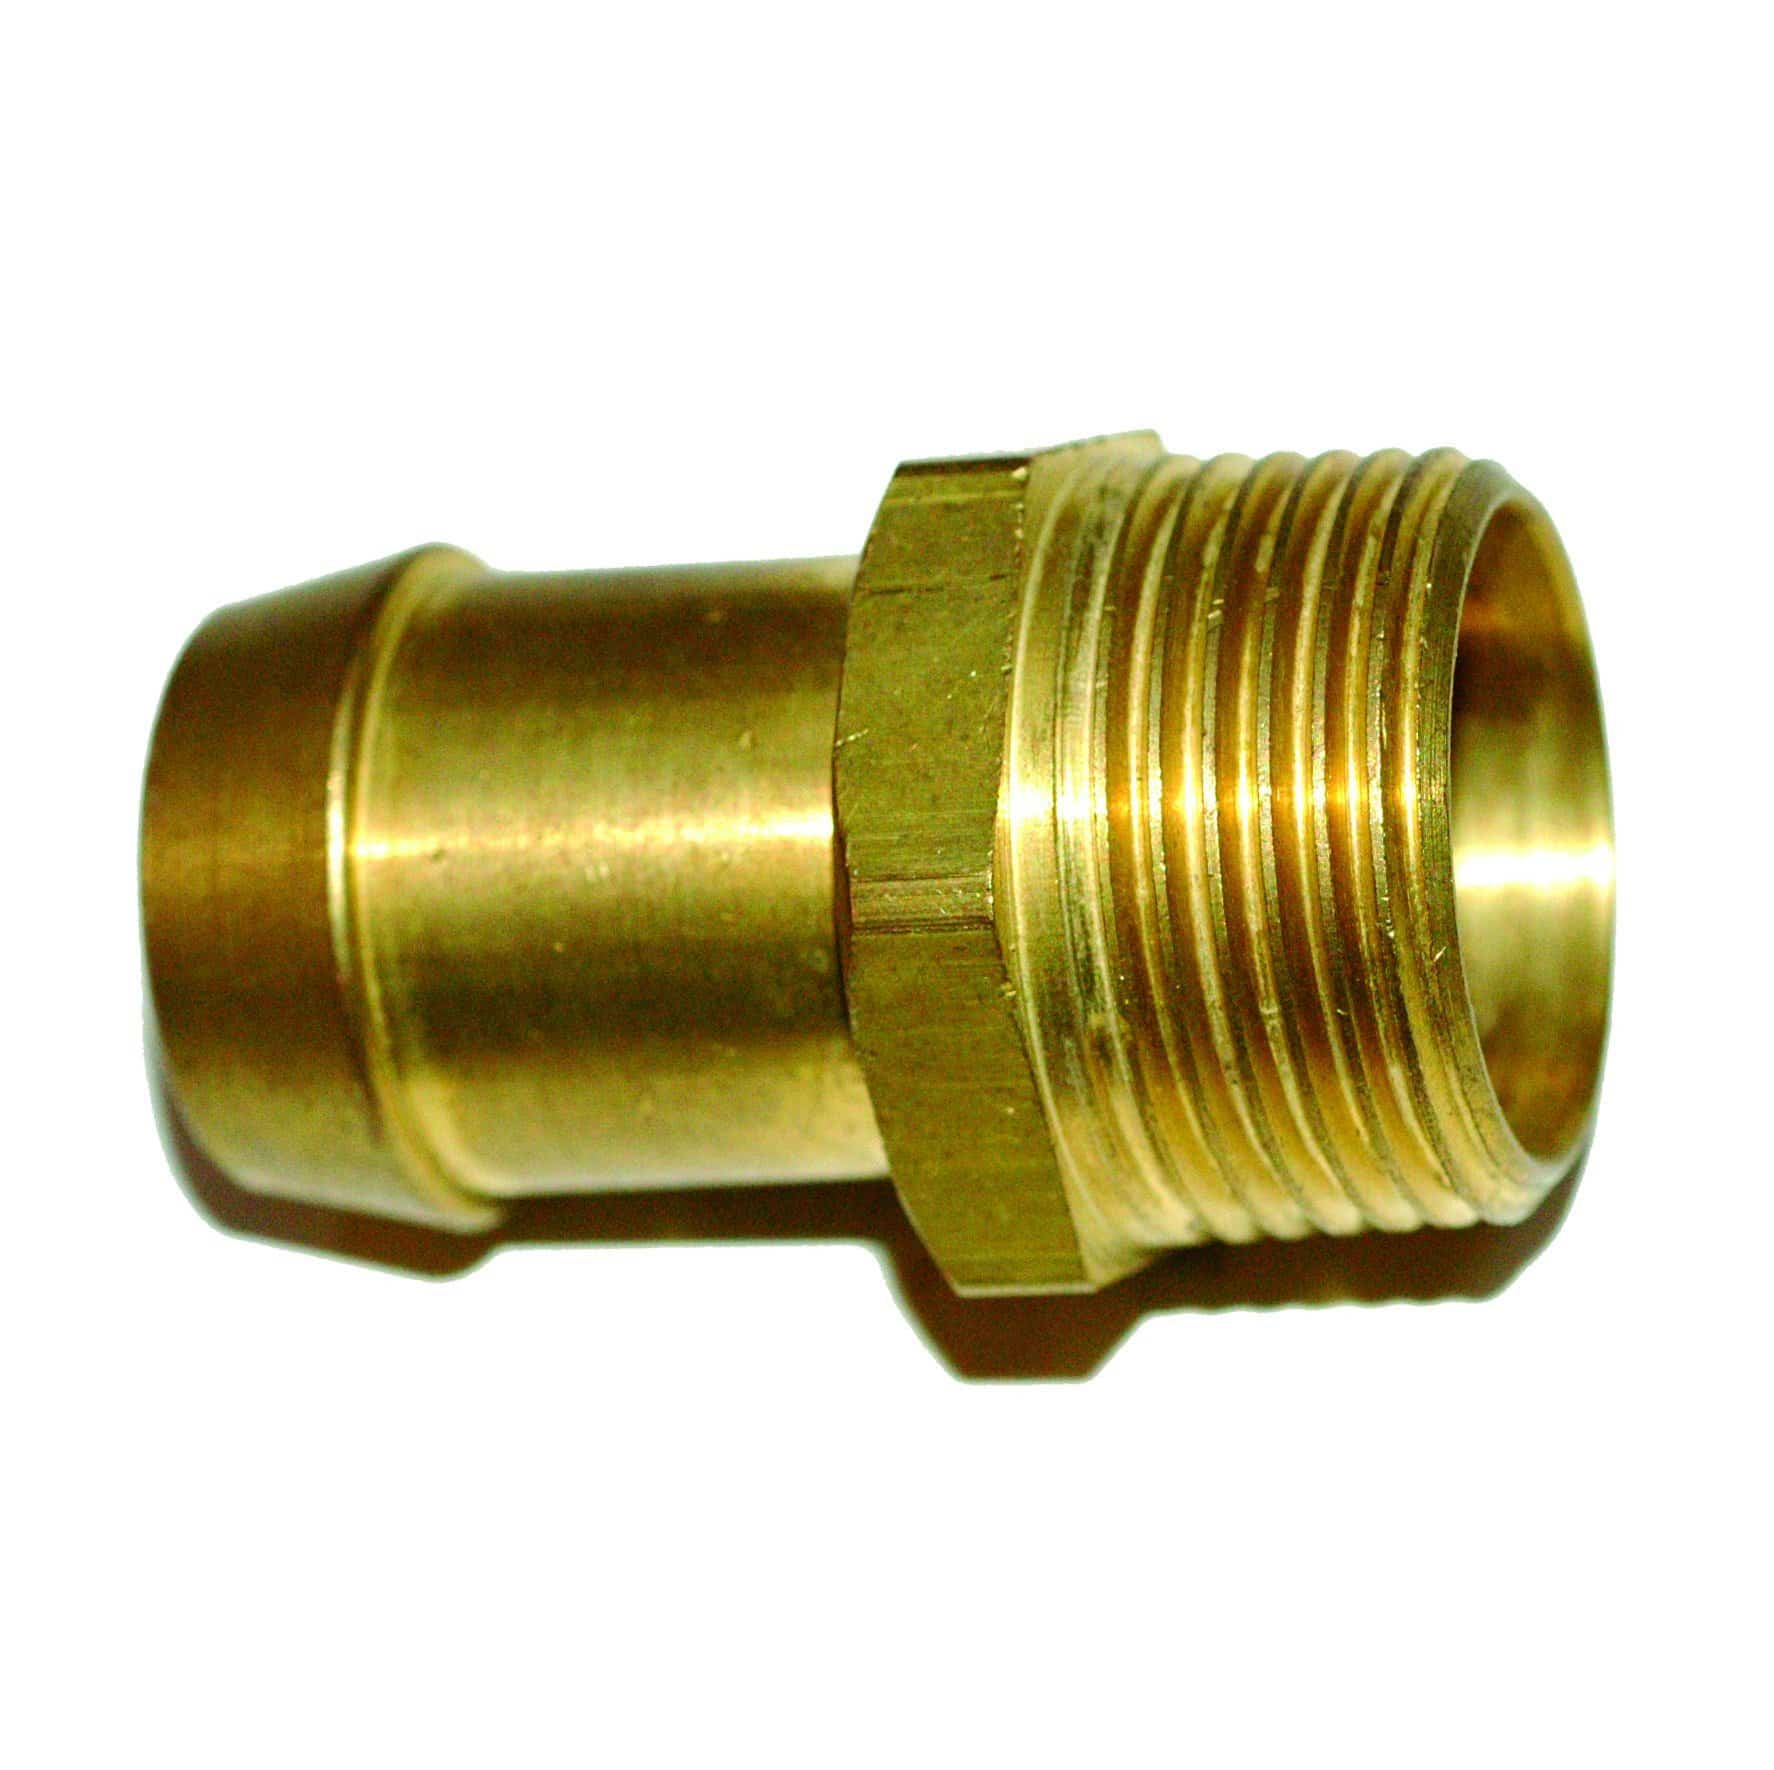 Brass crox male hosetail fitting with BSP thread